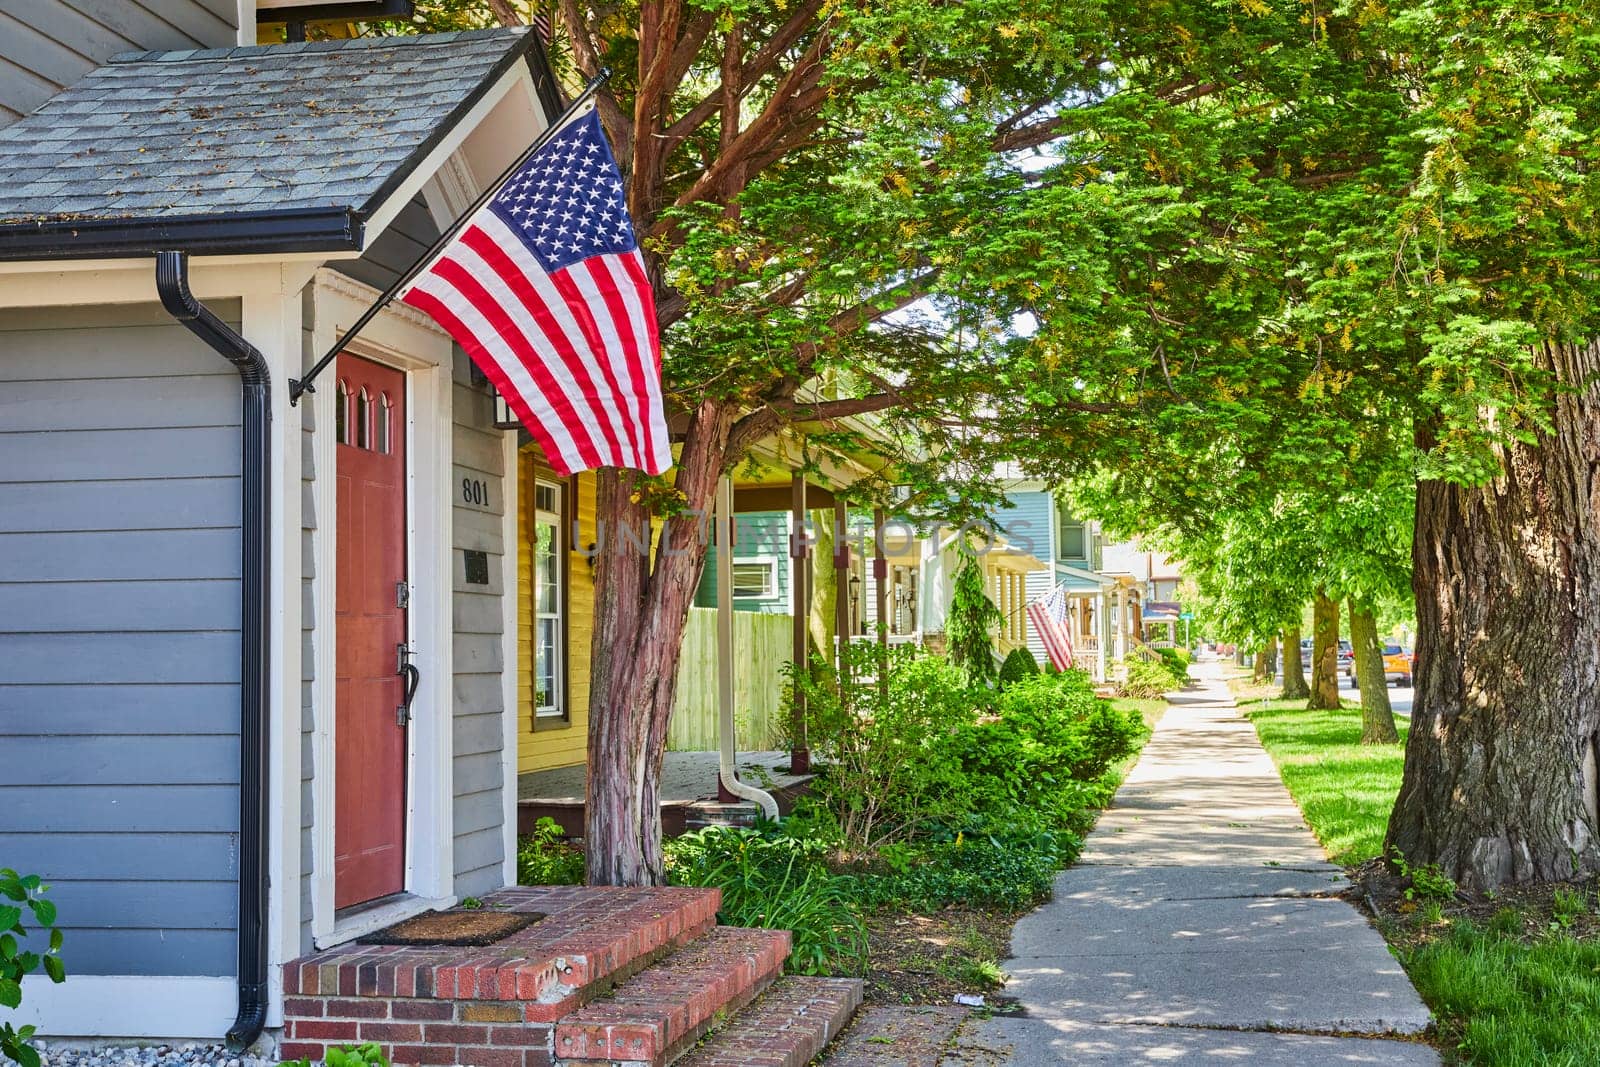 Patriotic American suburb with flags on houses in a serene, historic neighborhood in Fort Wayne, Indiana.